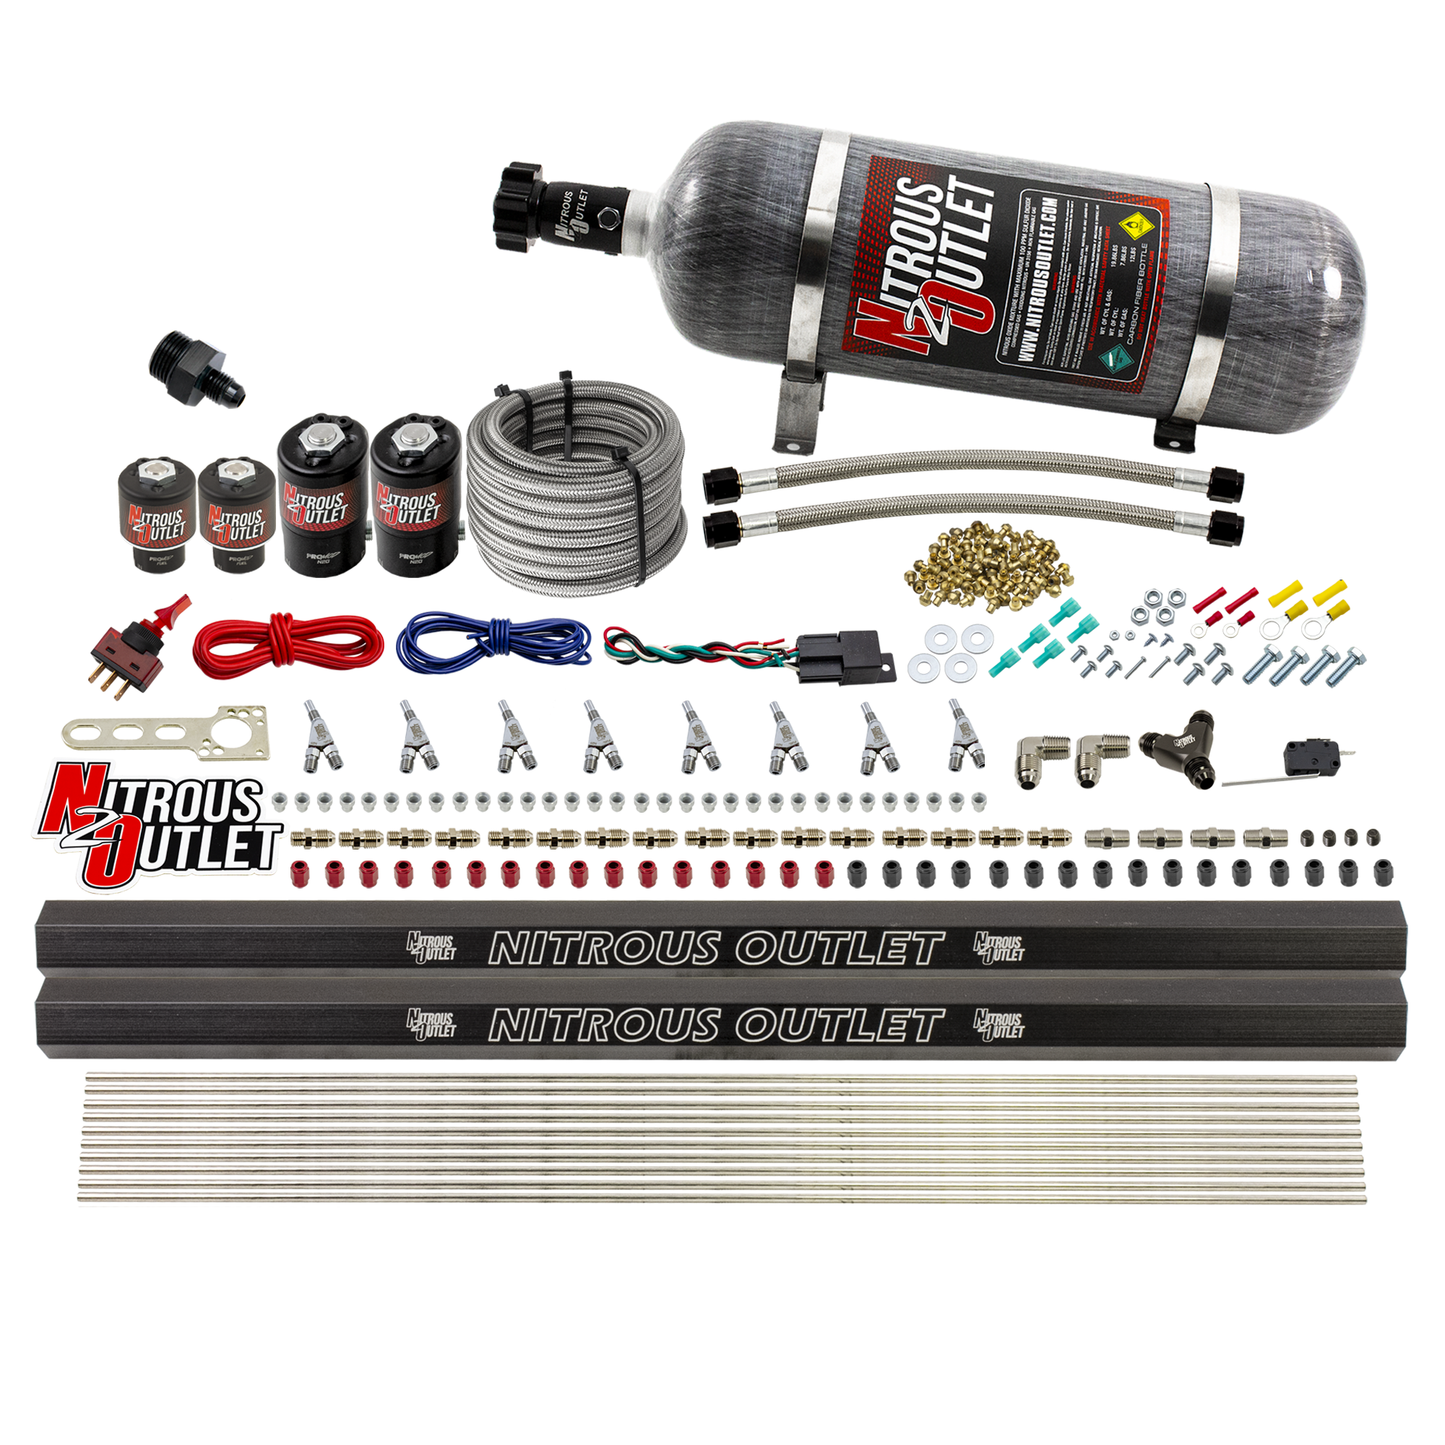 8 Cylinder Single Stage Direct Port Nitrous System with Injection Rails - Gas - .112 Nitrous/.177 Fuel - 45-55 PSI - Straight Blow Through Nozzles